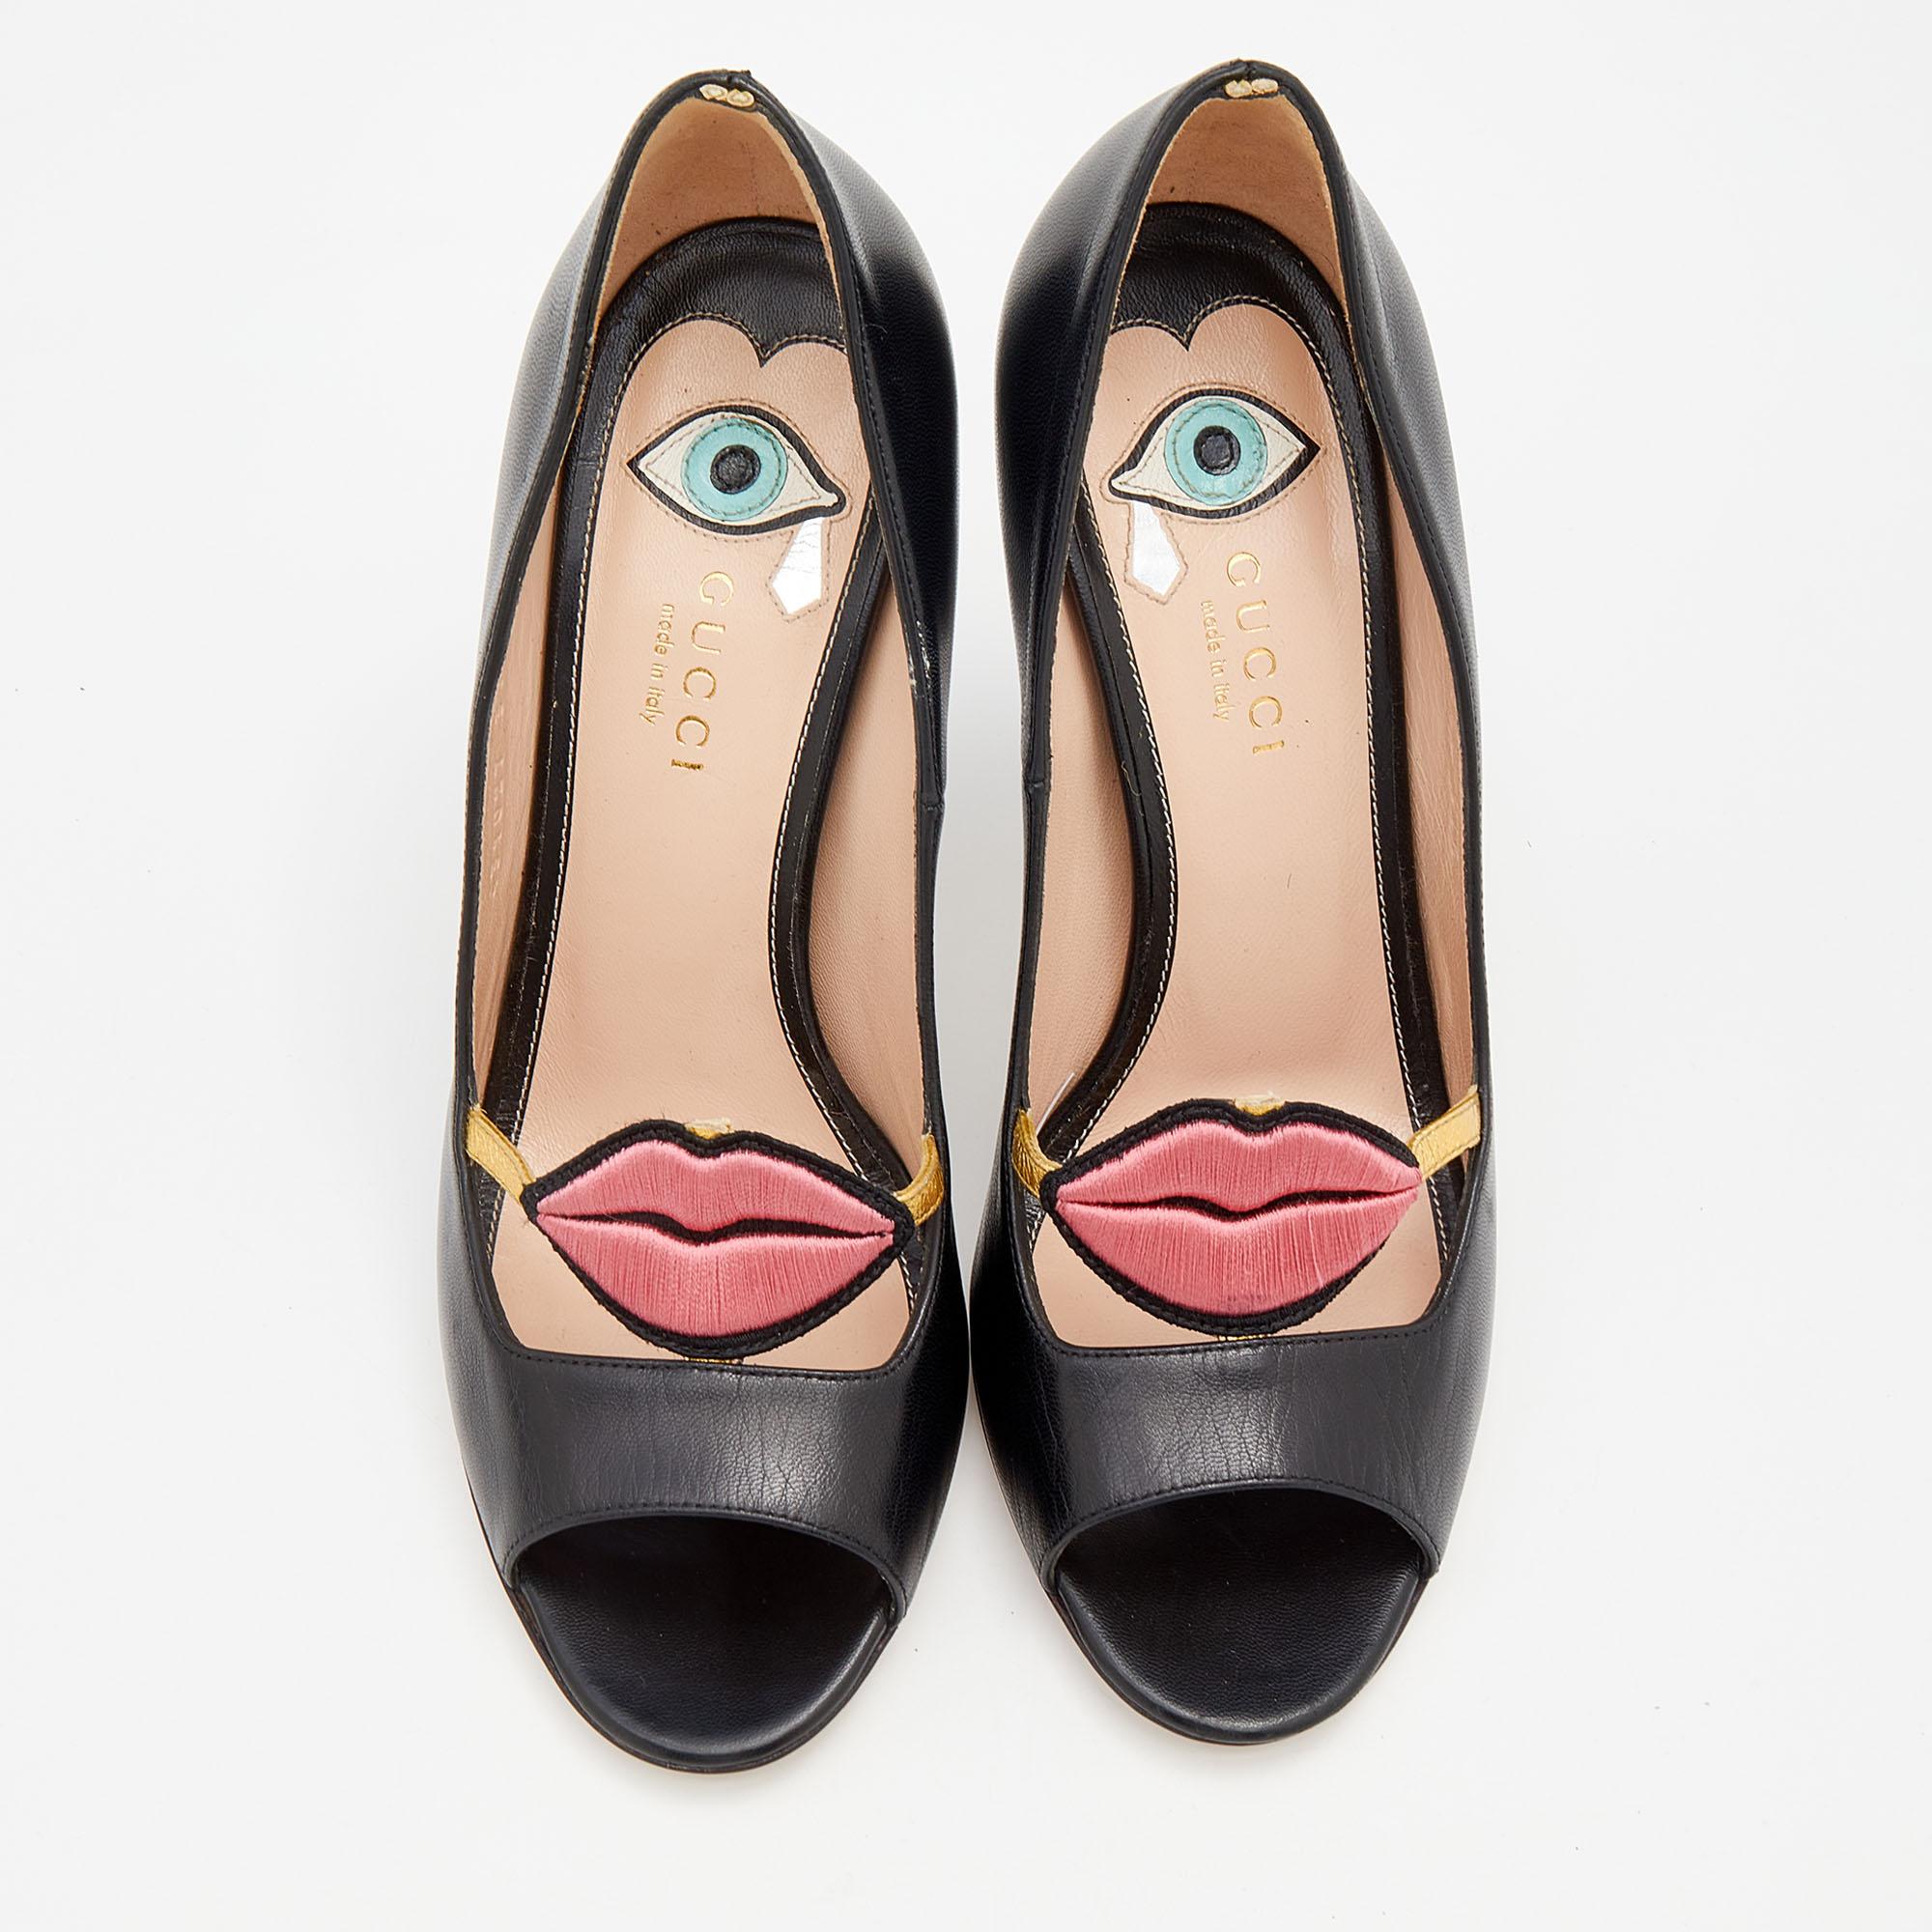 The playful and striking characteristics of this pair of Gucci pumps will make it a standout piece in your closet. Created from leather, it is made attractive with a lips motif on the front and an eye-like design on the insoles. The 11cm heels of